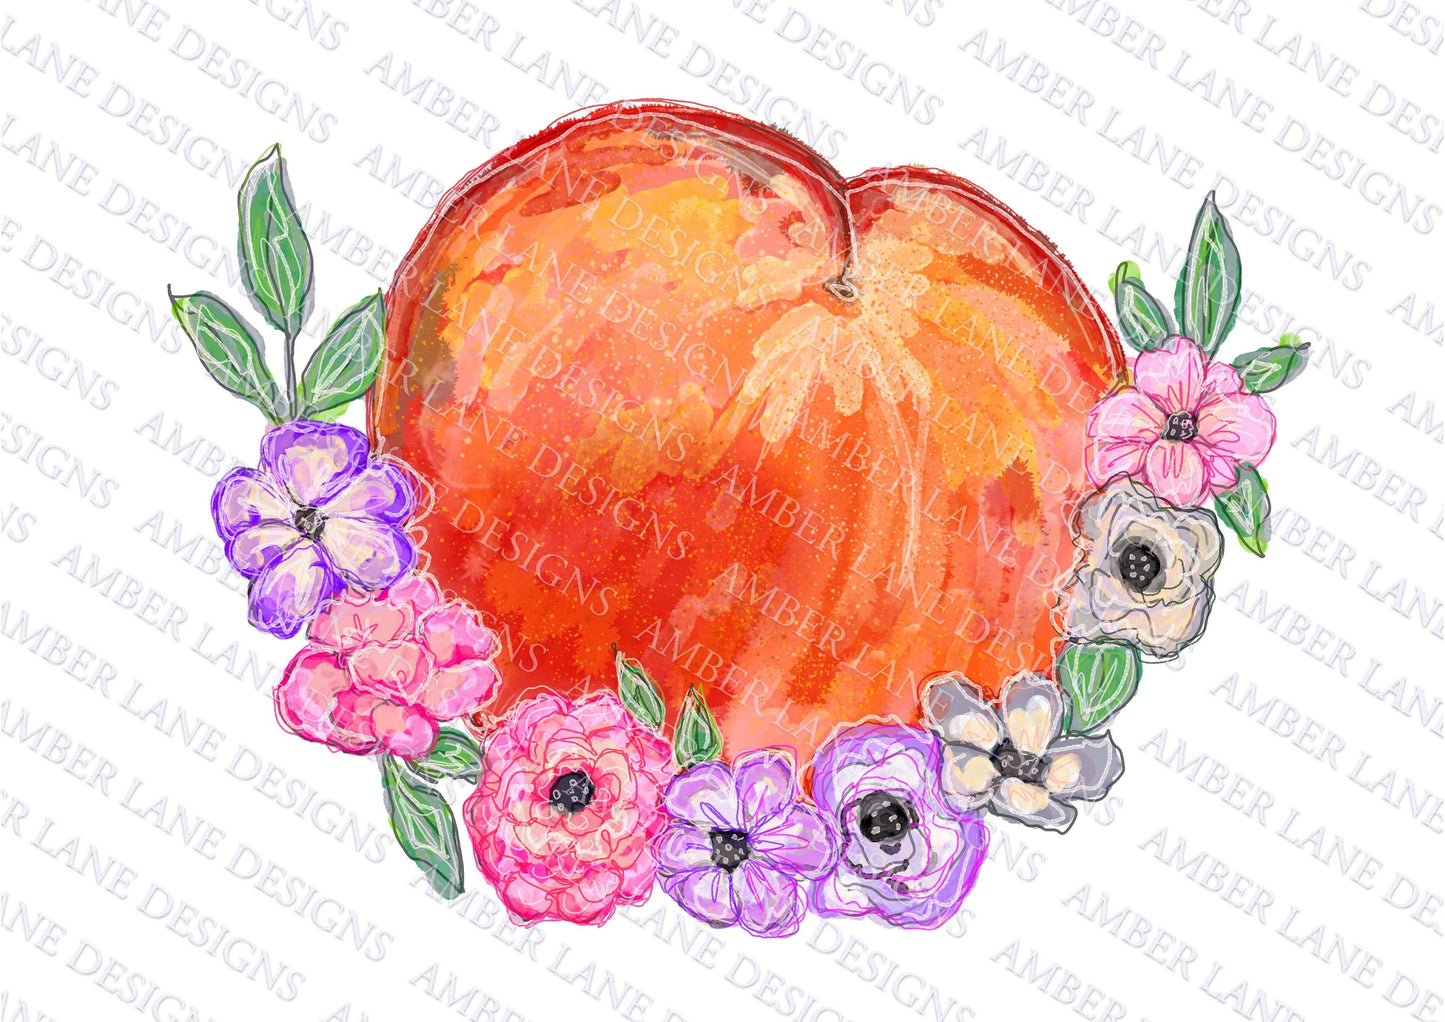 Peach with flowers png file, hand drawn watercolor art, still life, Georgia peach